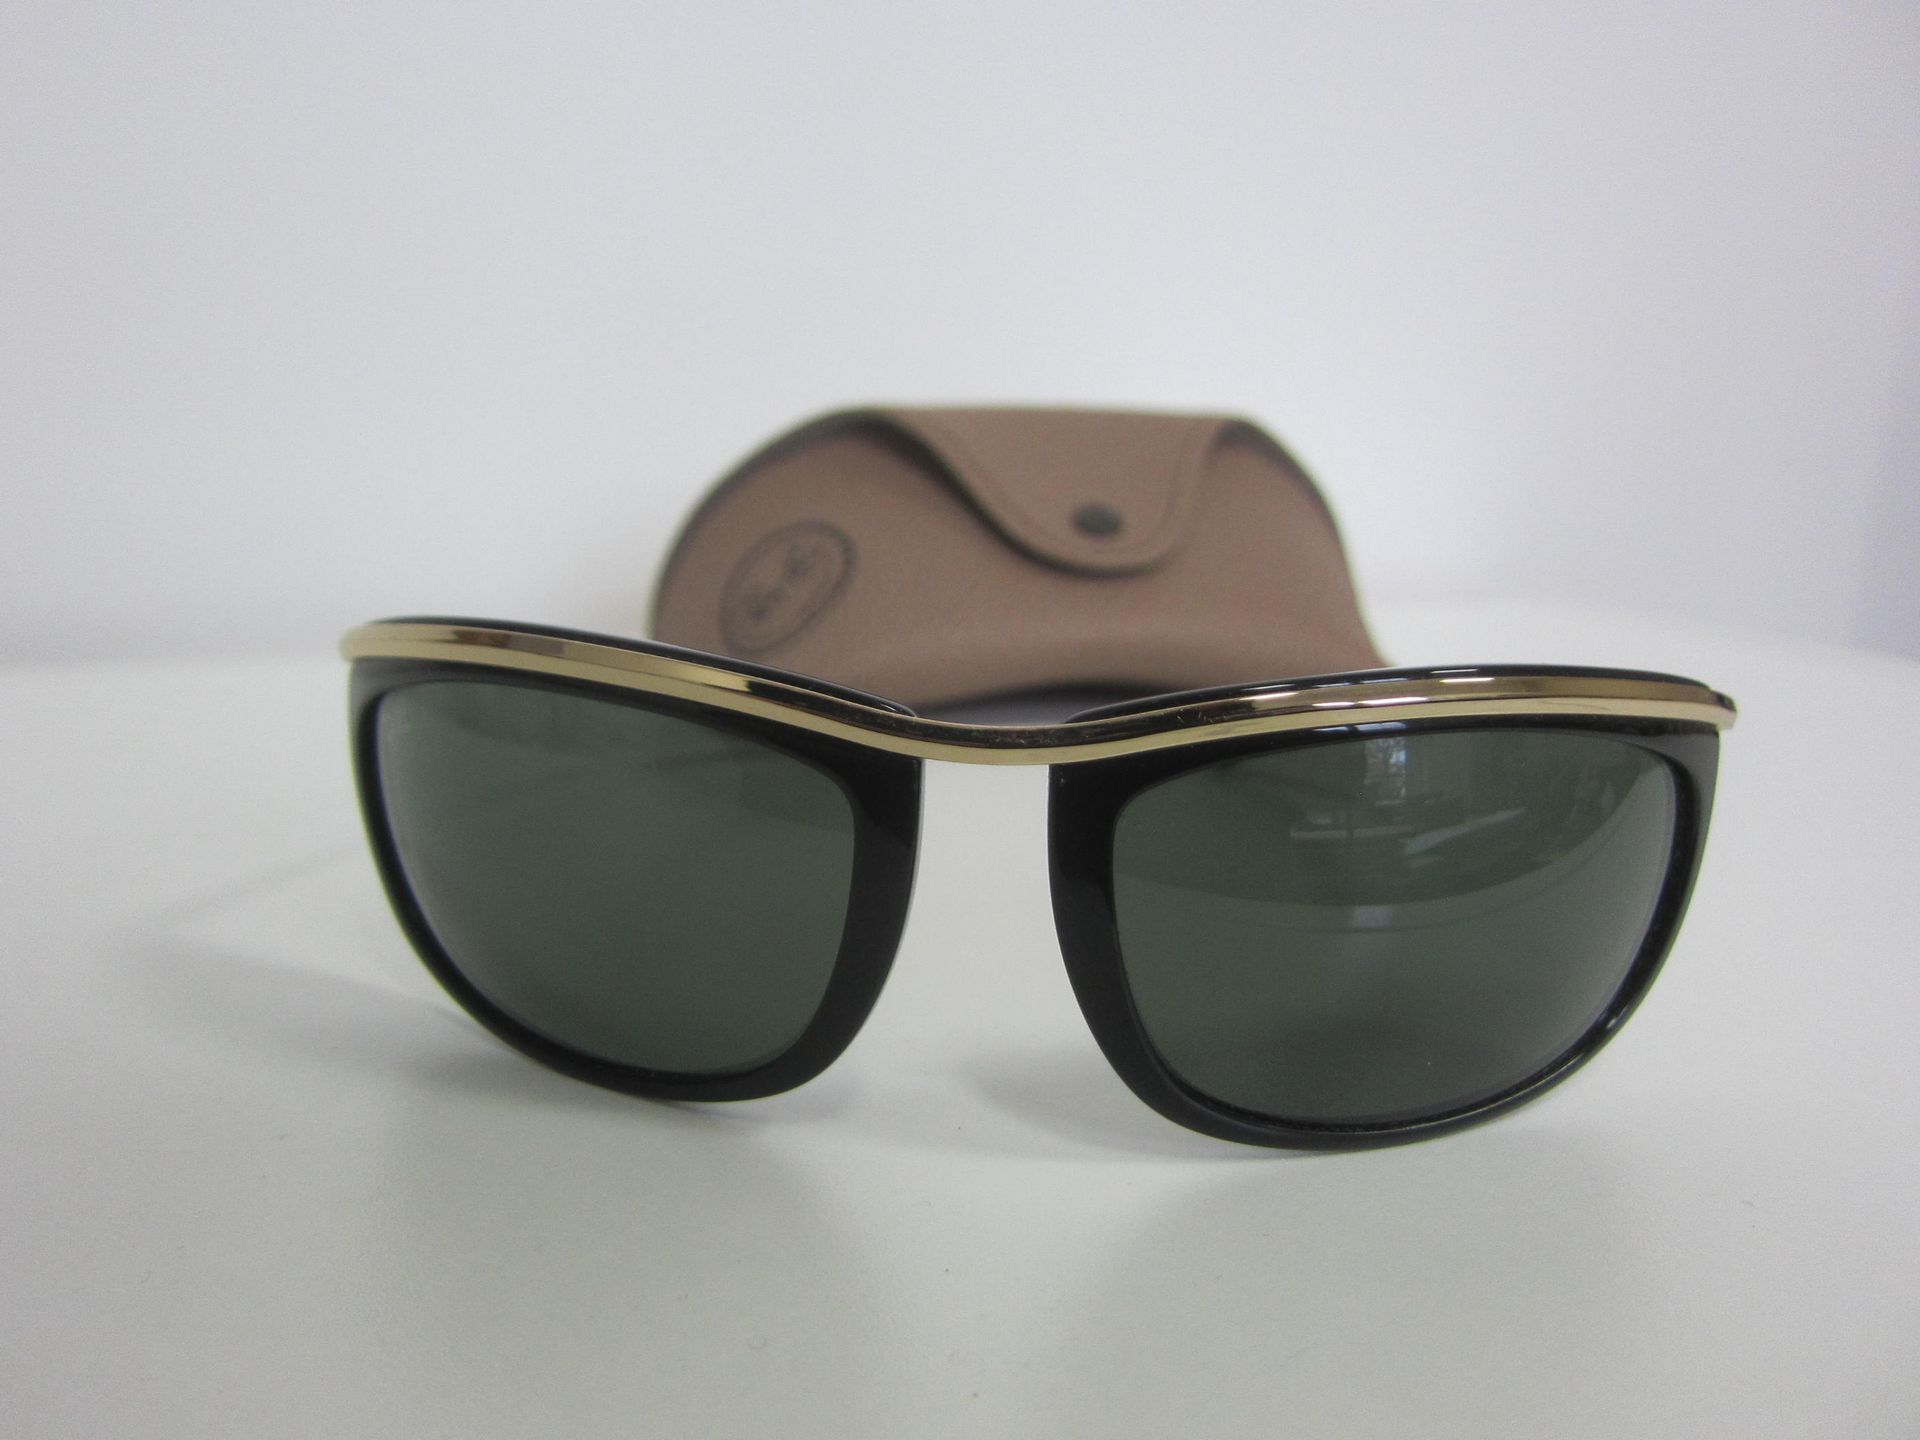 RAY BAN, sunglasses for men with leather case, good condition